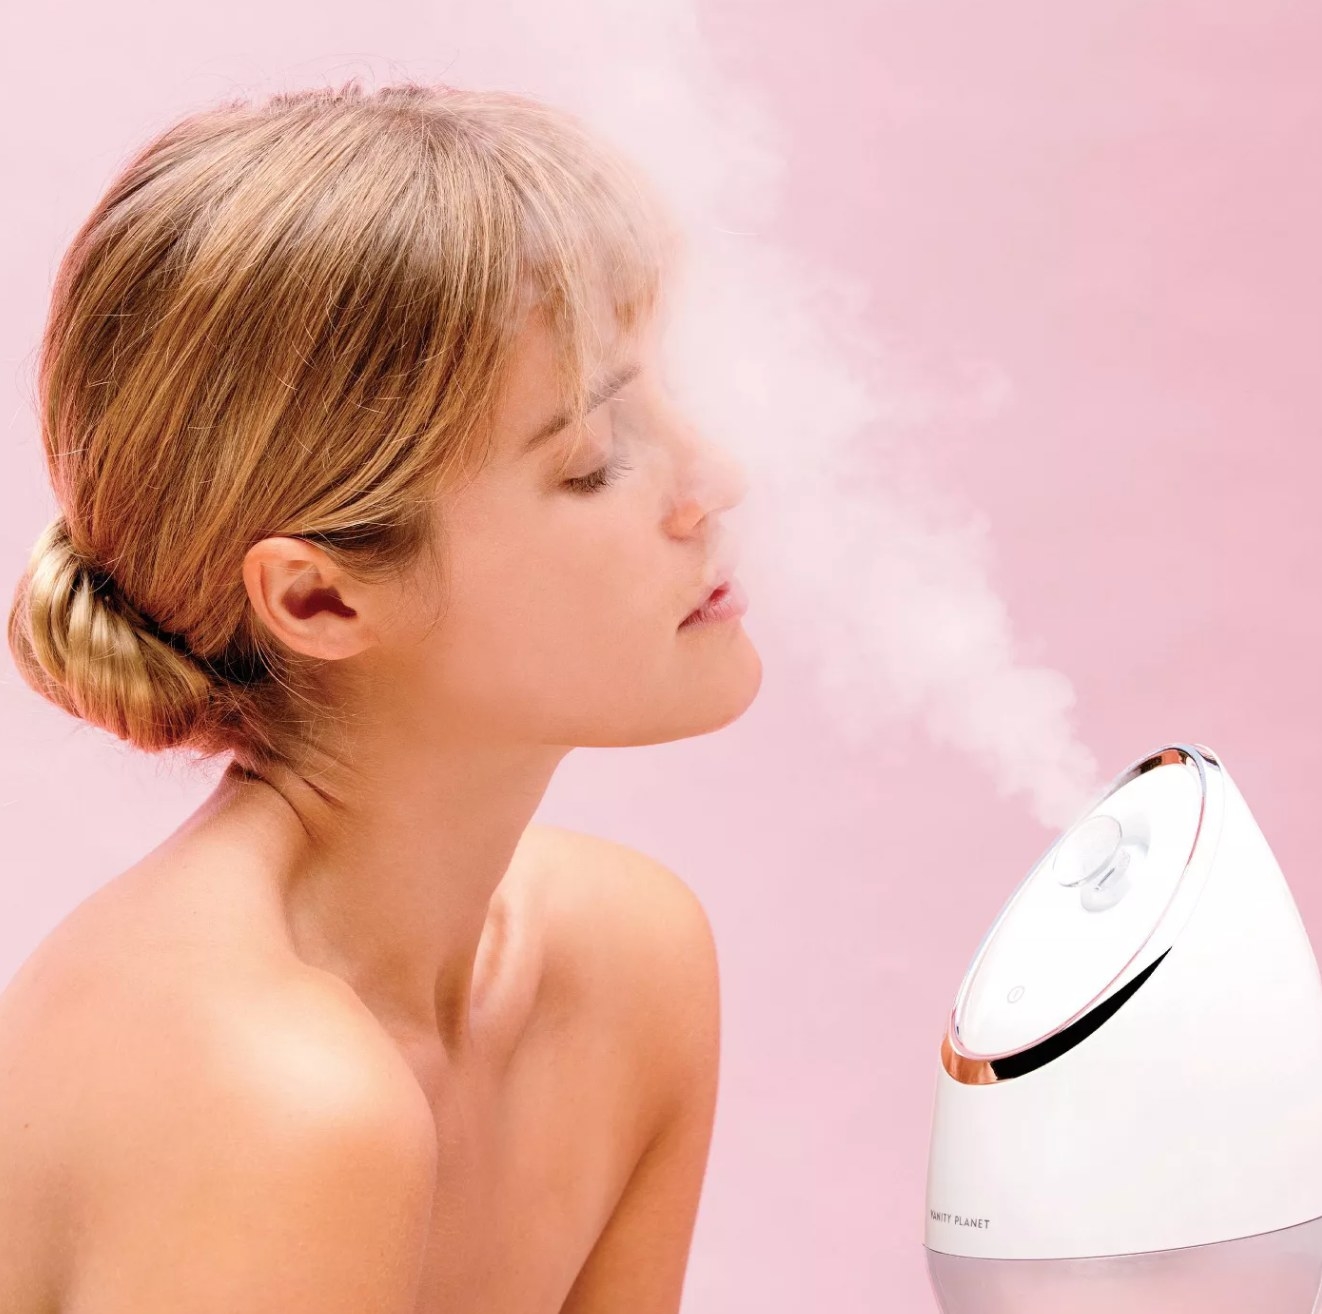 a model using the facial steamer against a pink background